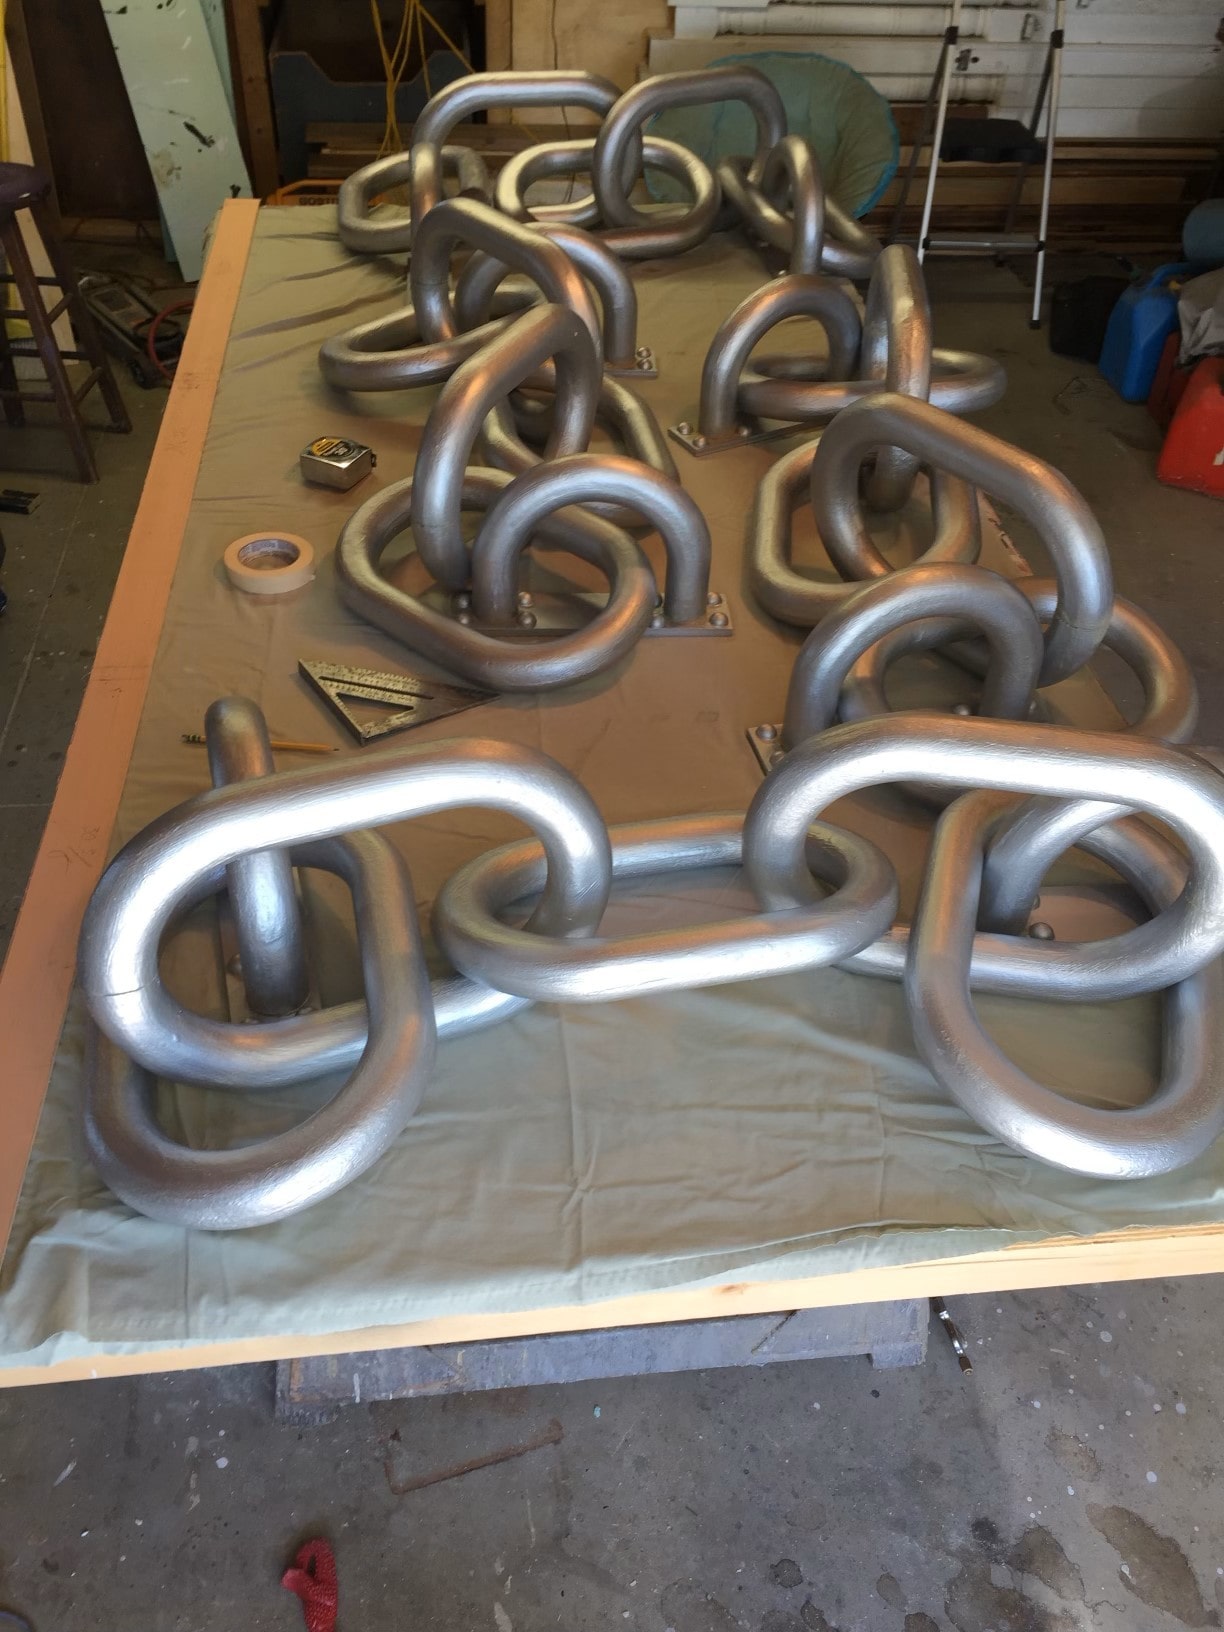 Giant fauc chain for pro football team